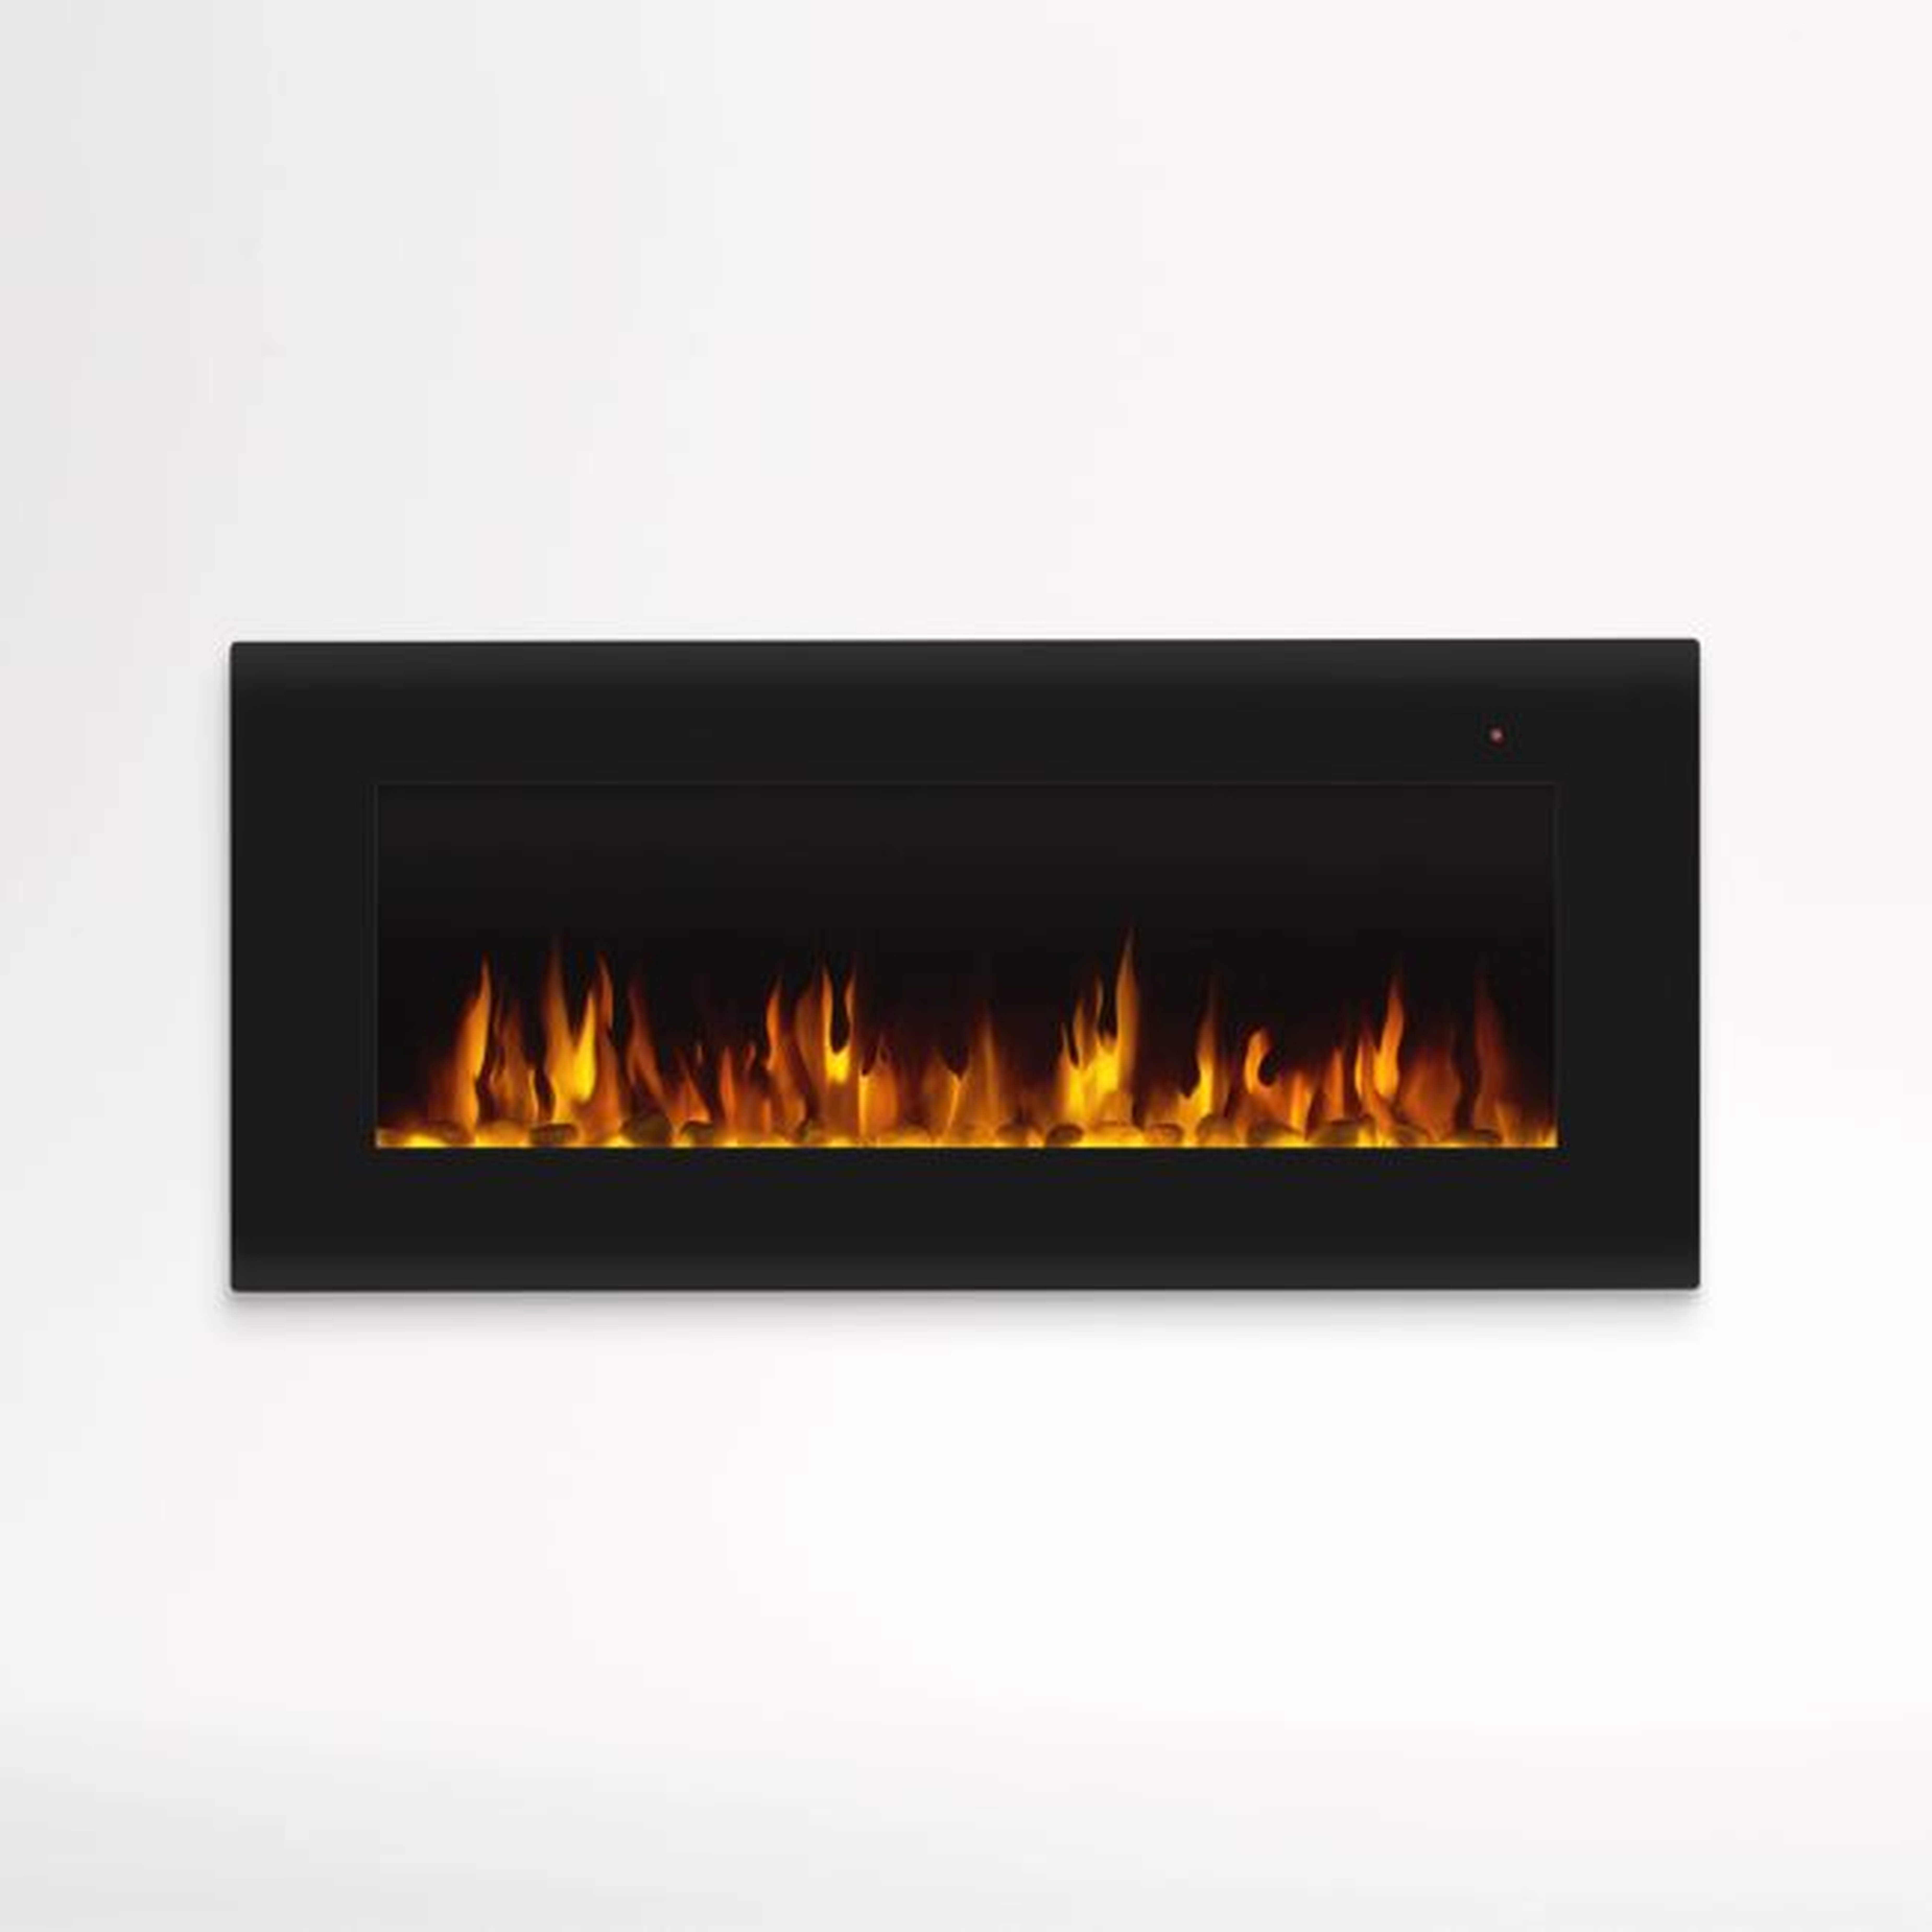 Corretto 40" Fireplace - Crate and Barrel